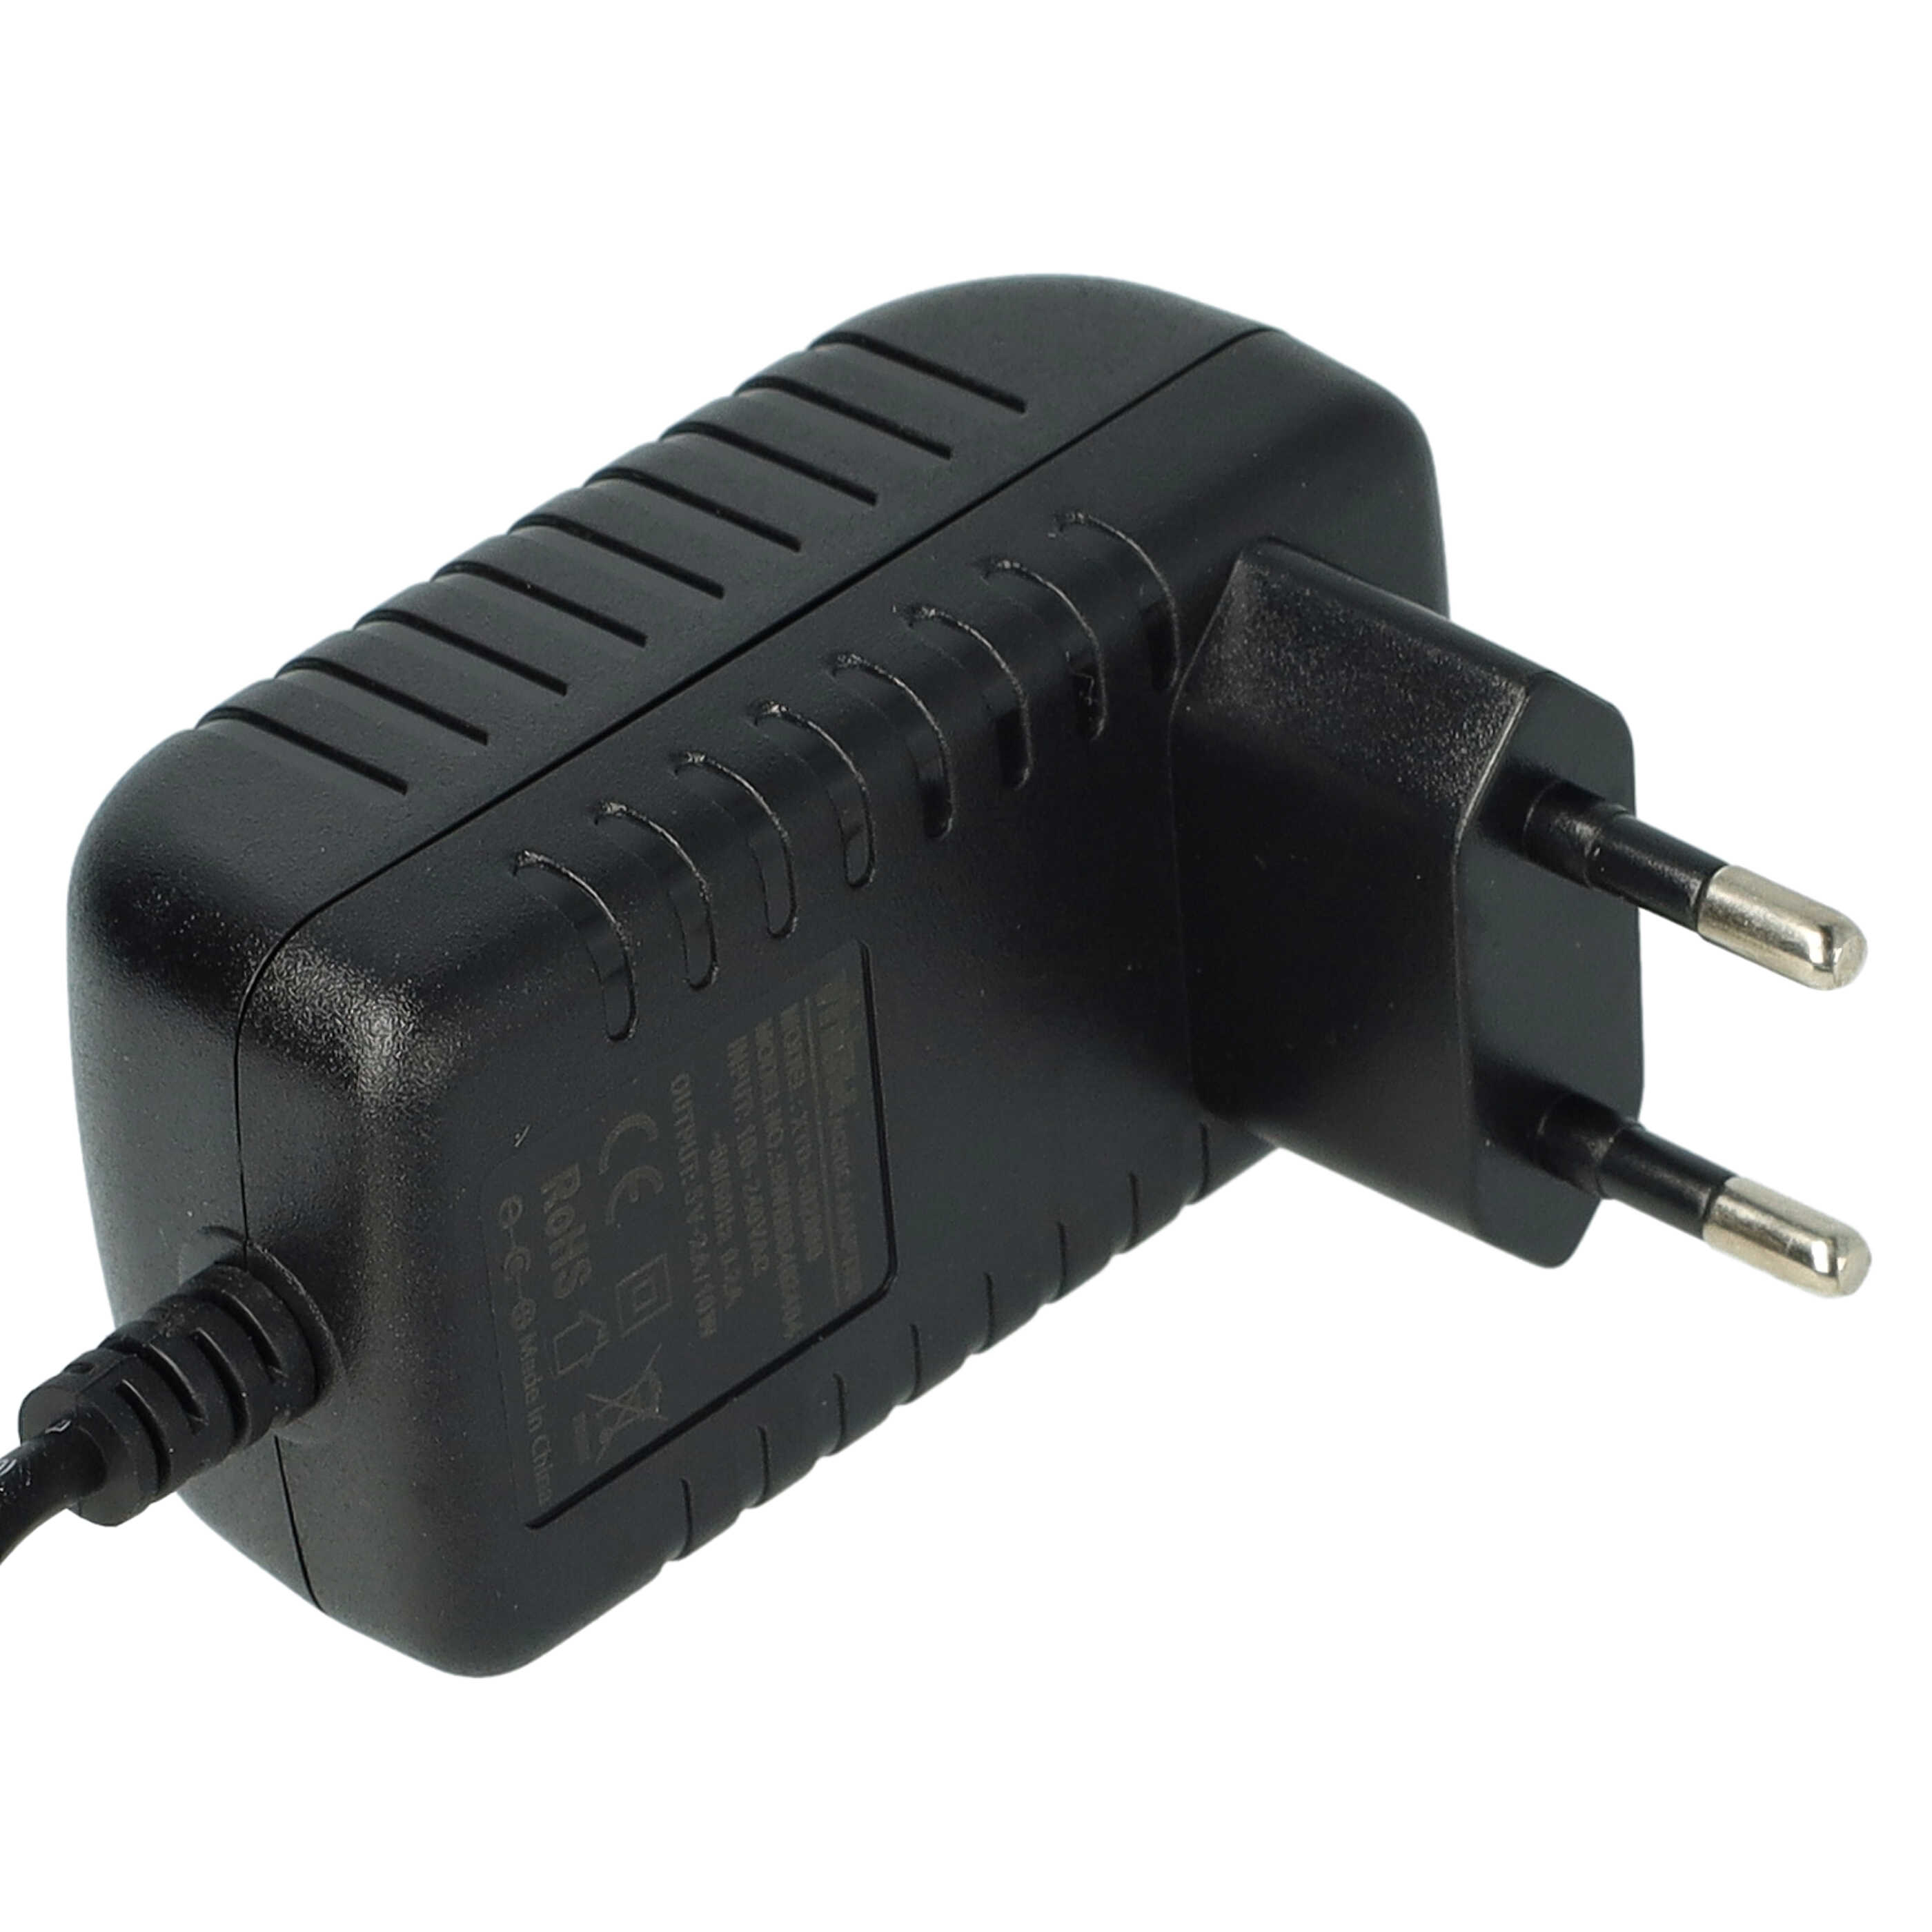 Mains Power Adapter with 5.5 x 2.5 mm Plug suitable for various Electric Devices - 5 V / 2 A